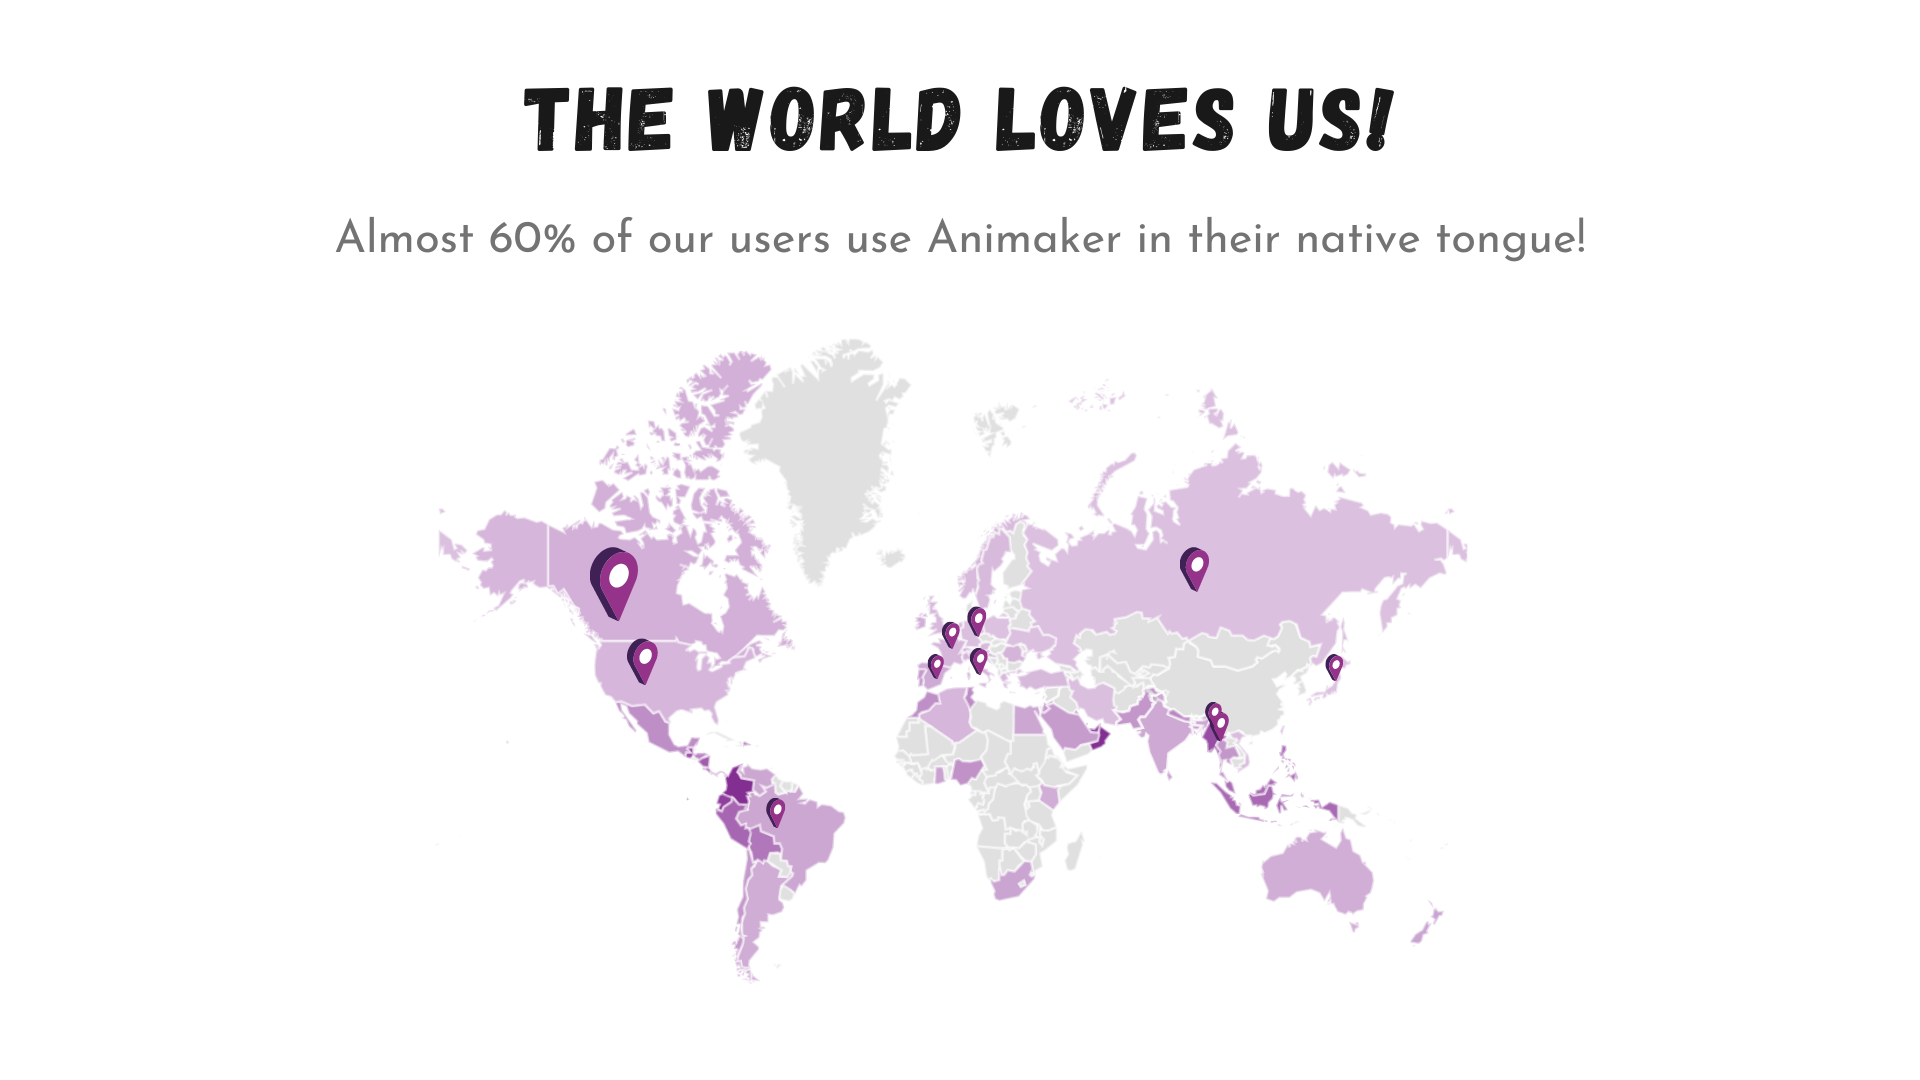 Animaker 2.0 went global with 12 new languages